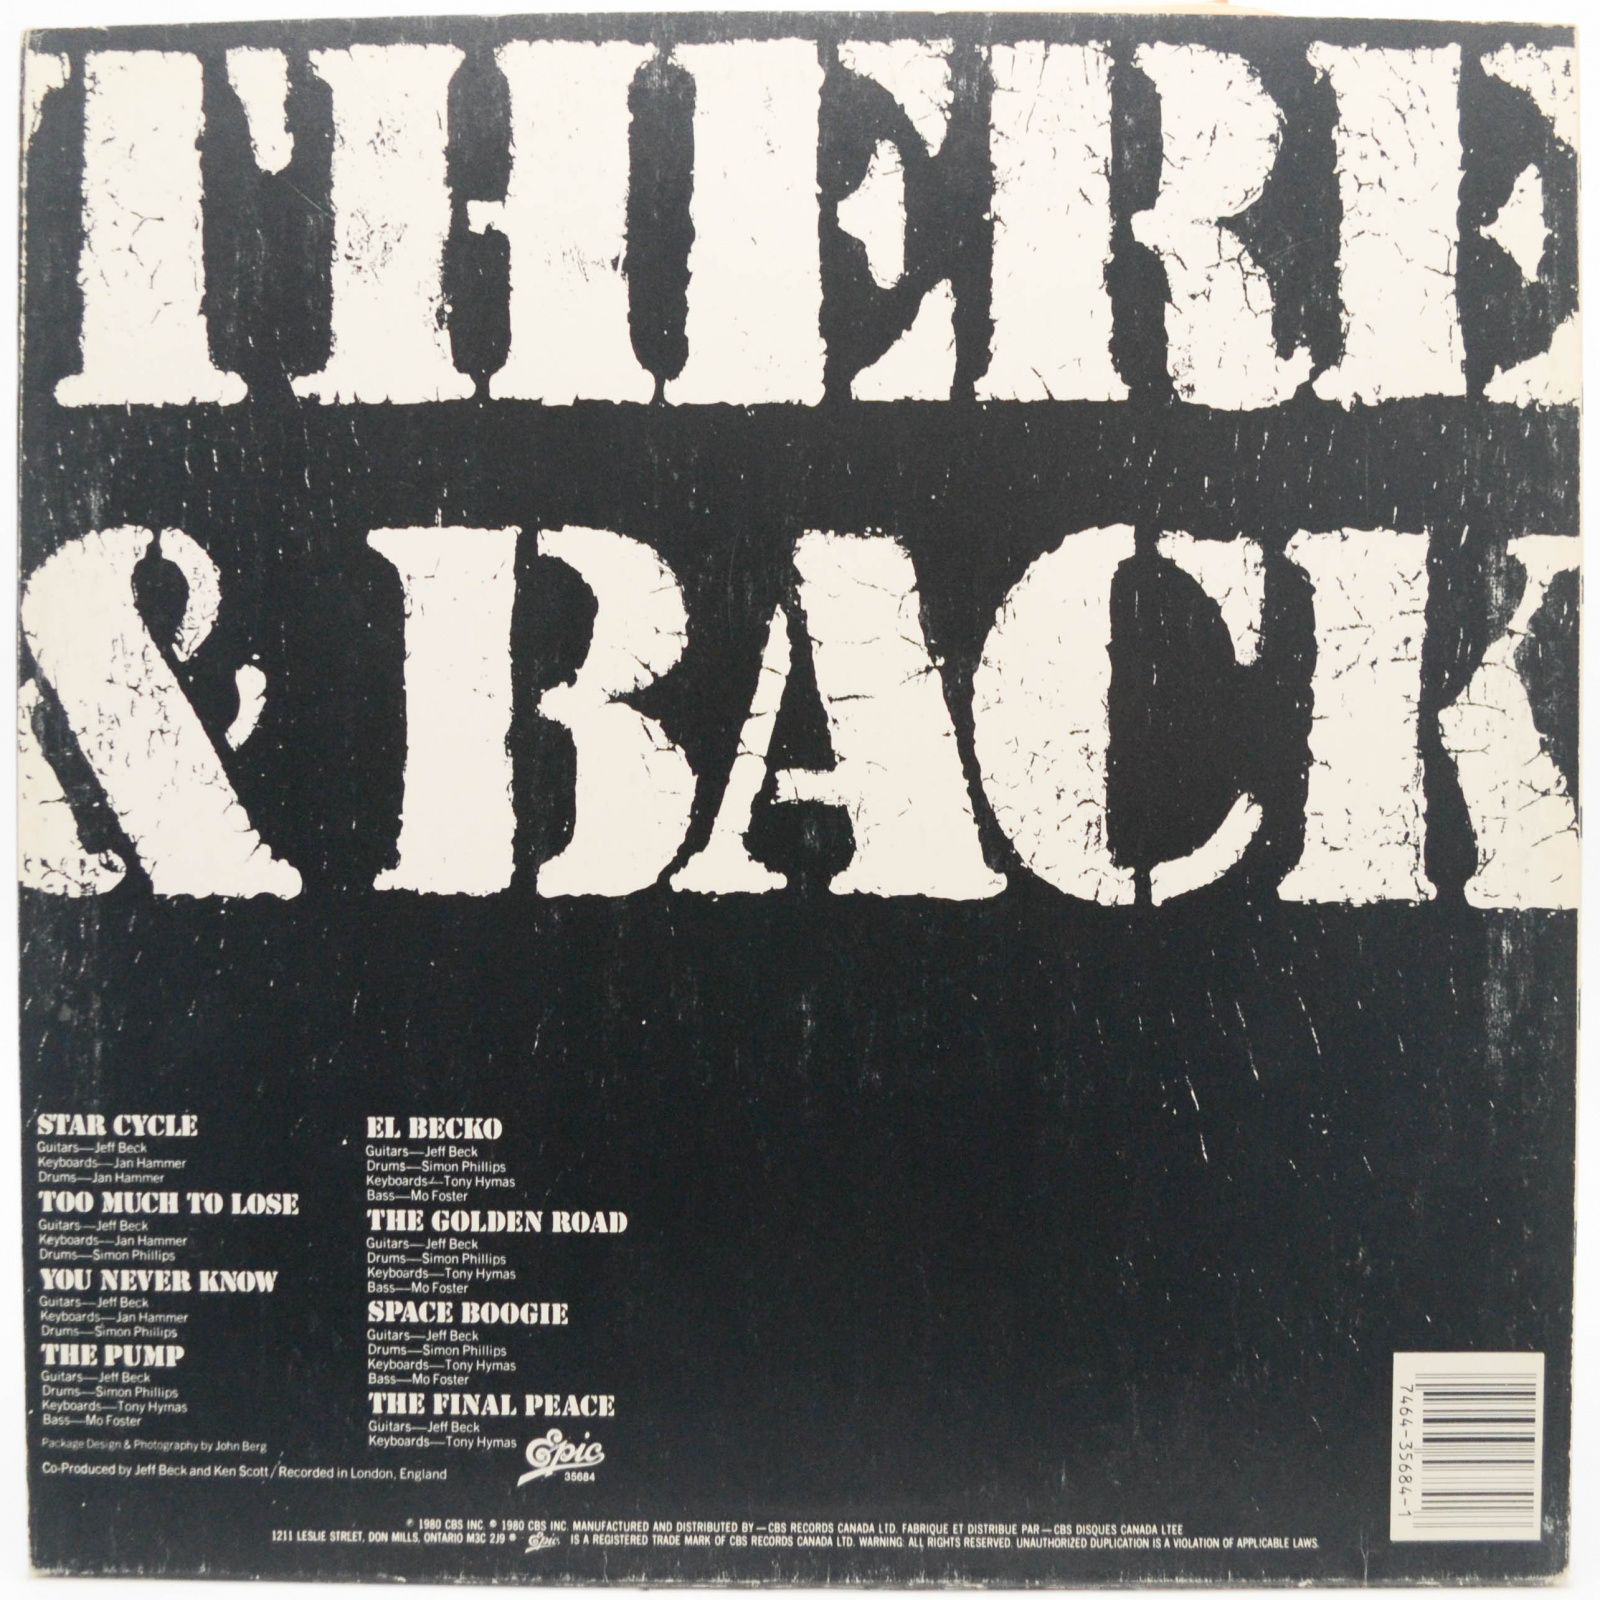 Jeff Beck — There And Back, 1980